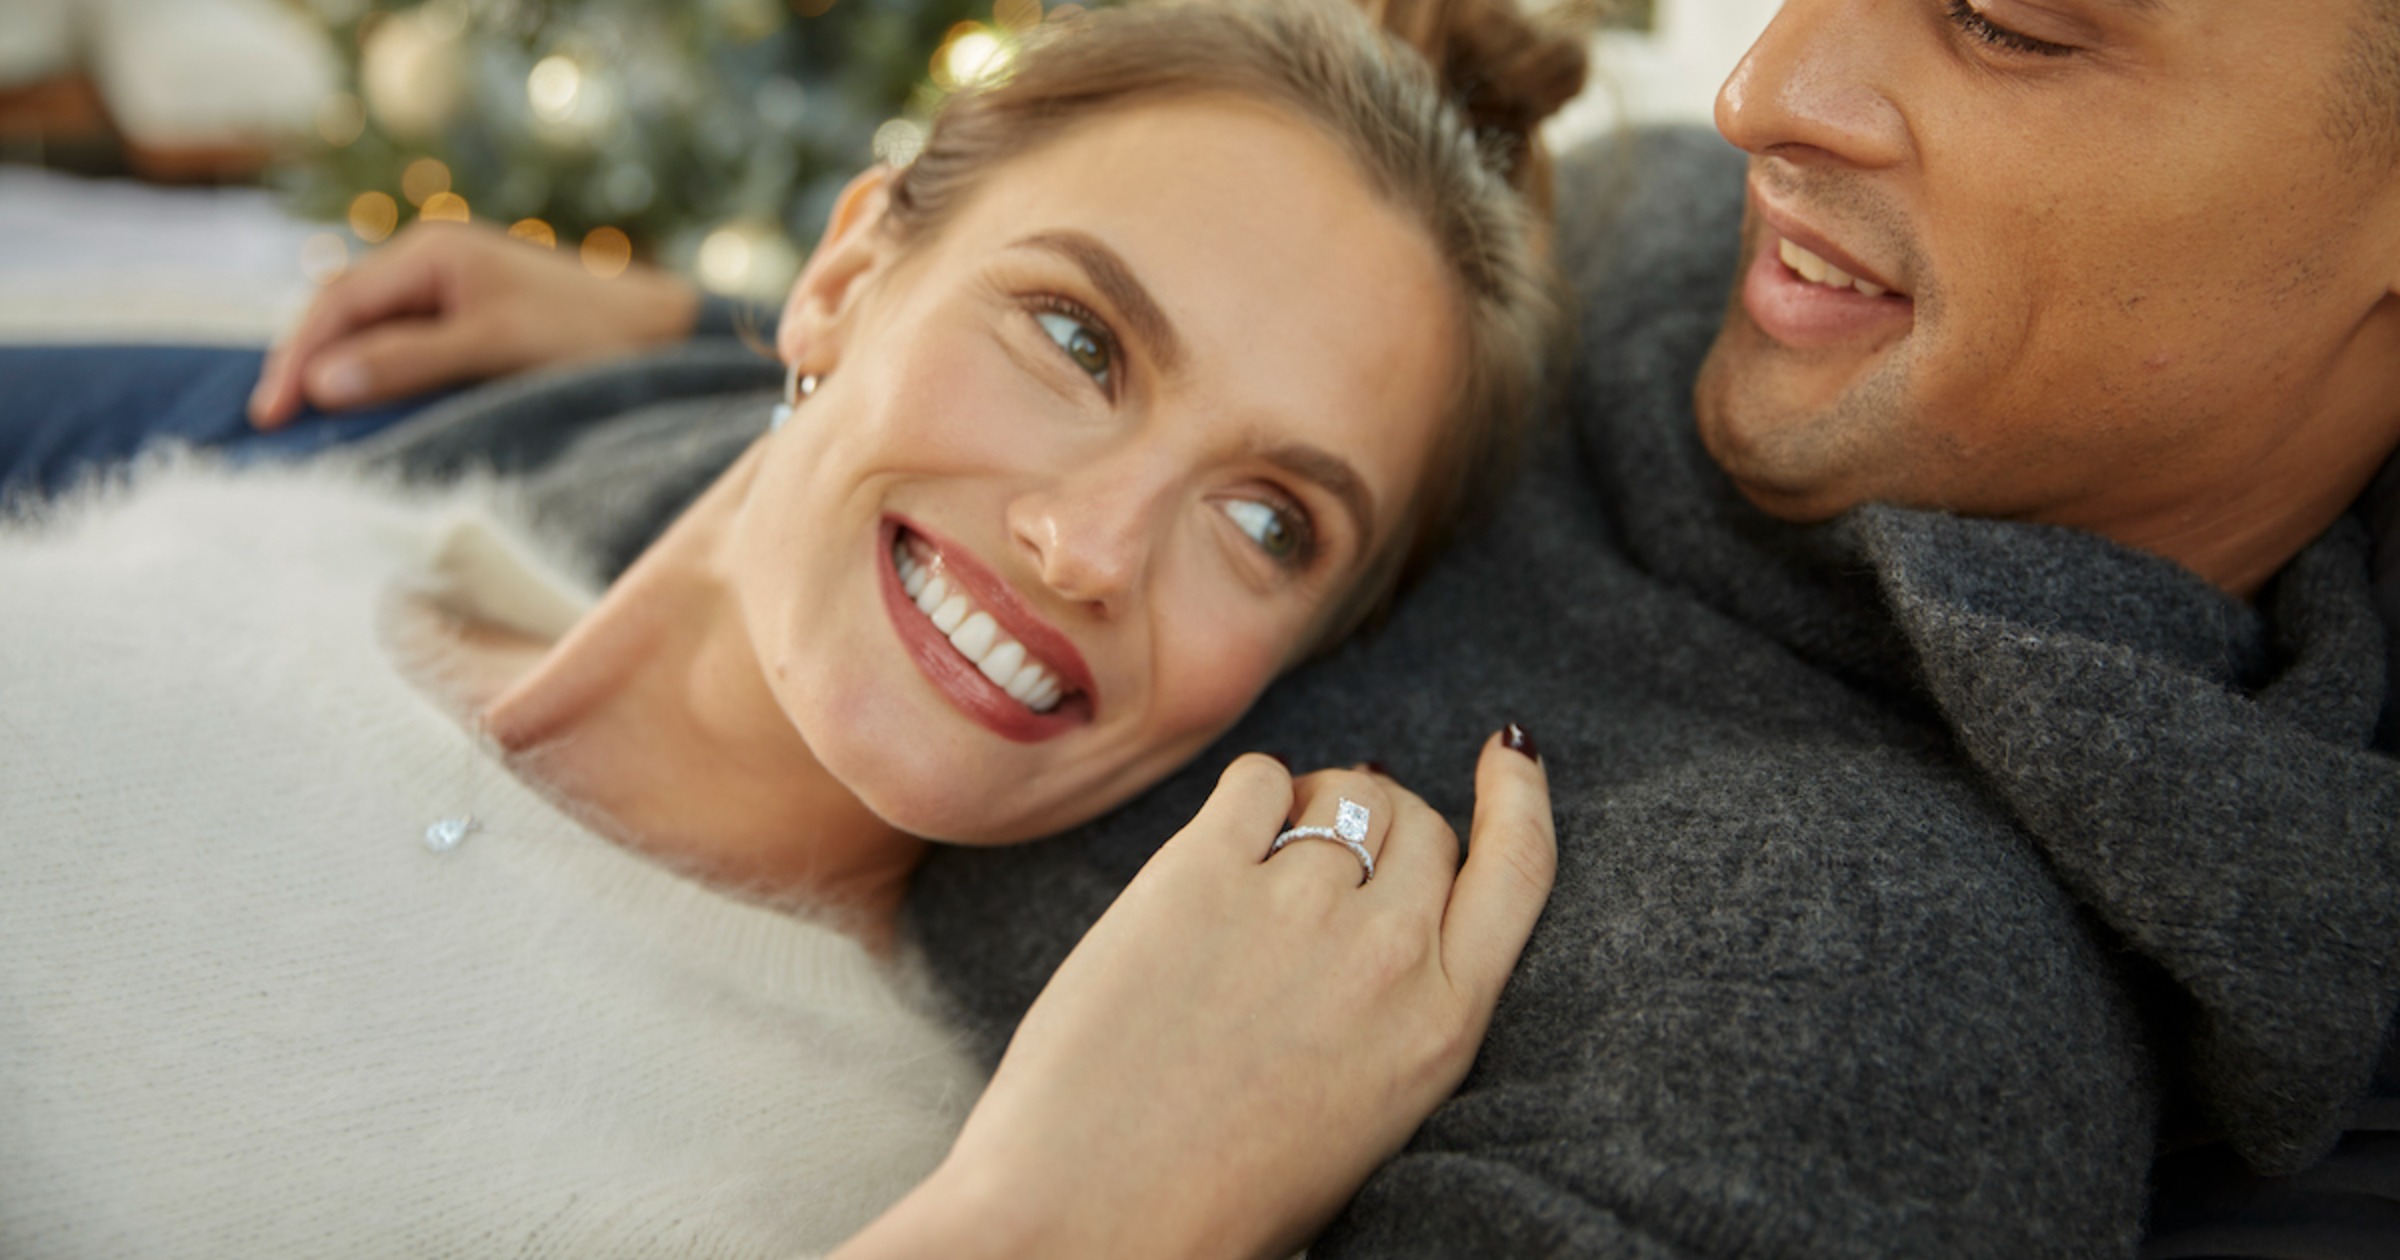 How to Plan the Perfect Holiday Proposal